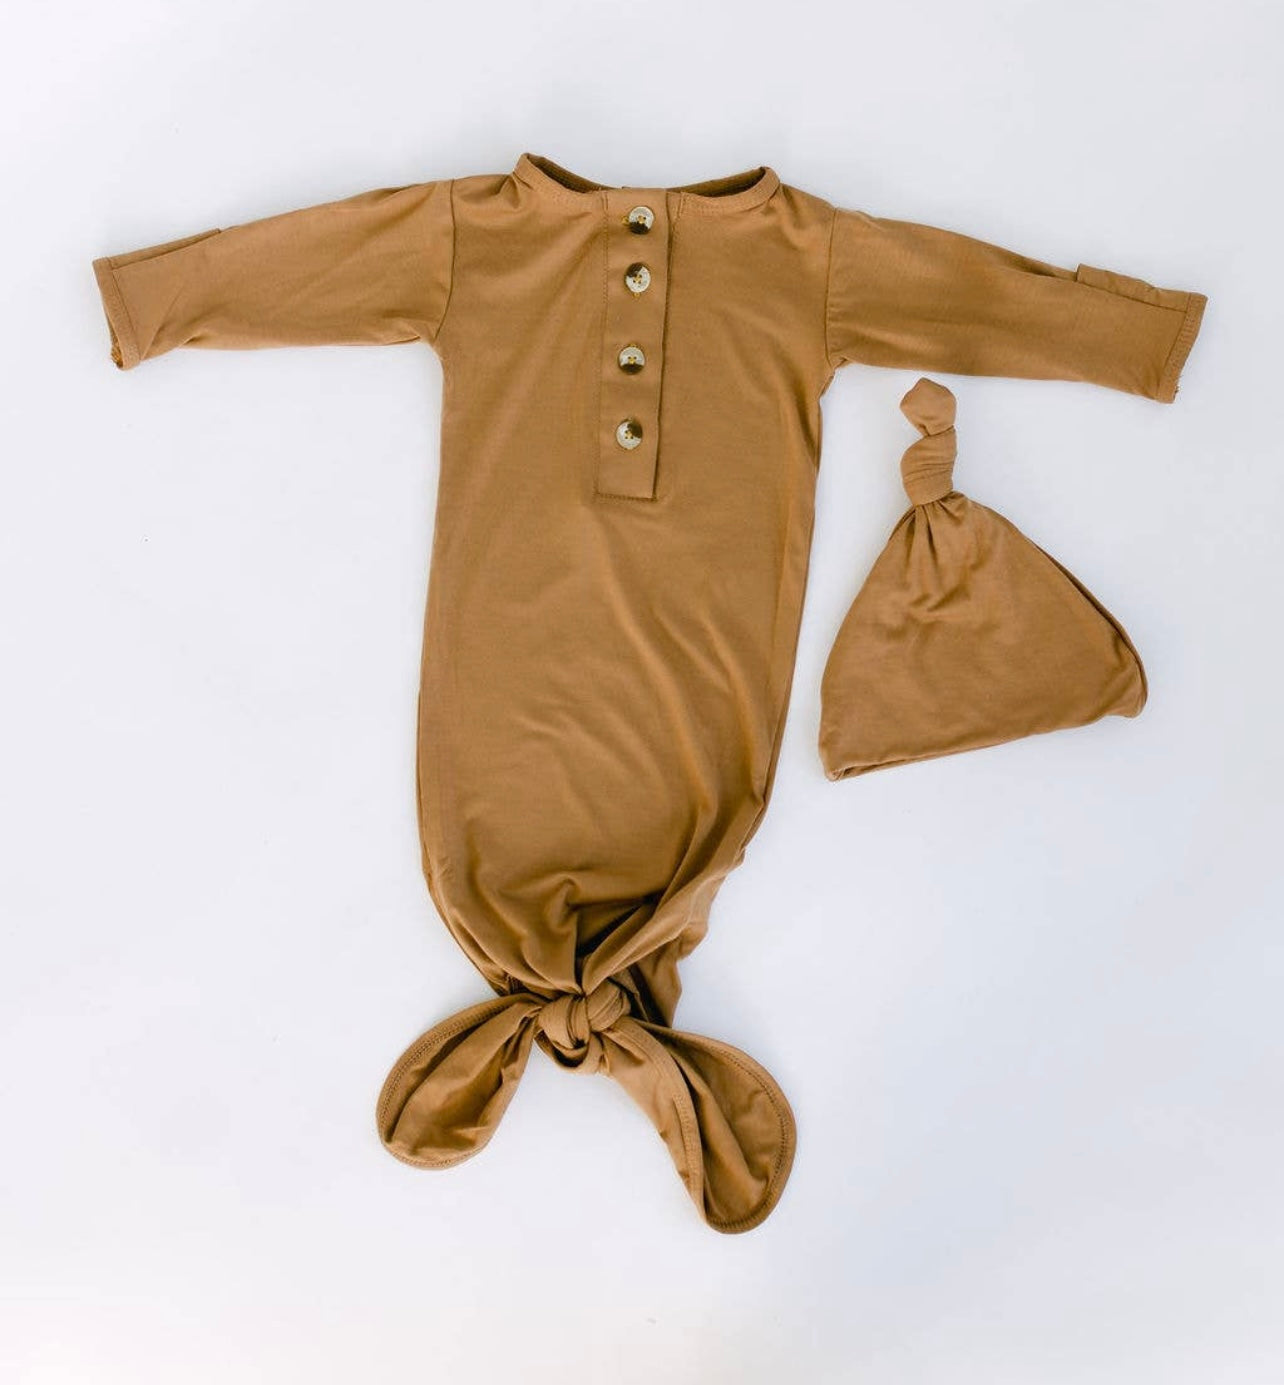 Stroller Society - Knotted Baby Gown and Hat Set